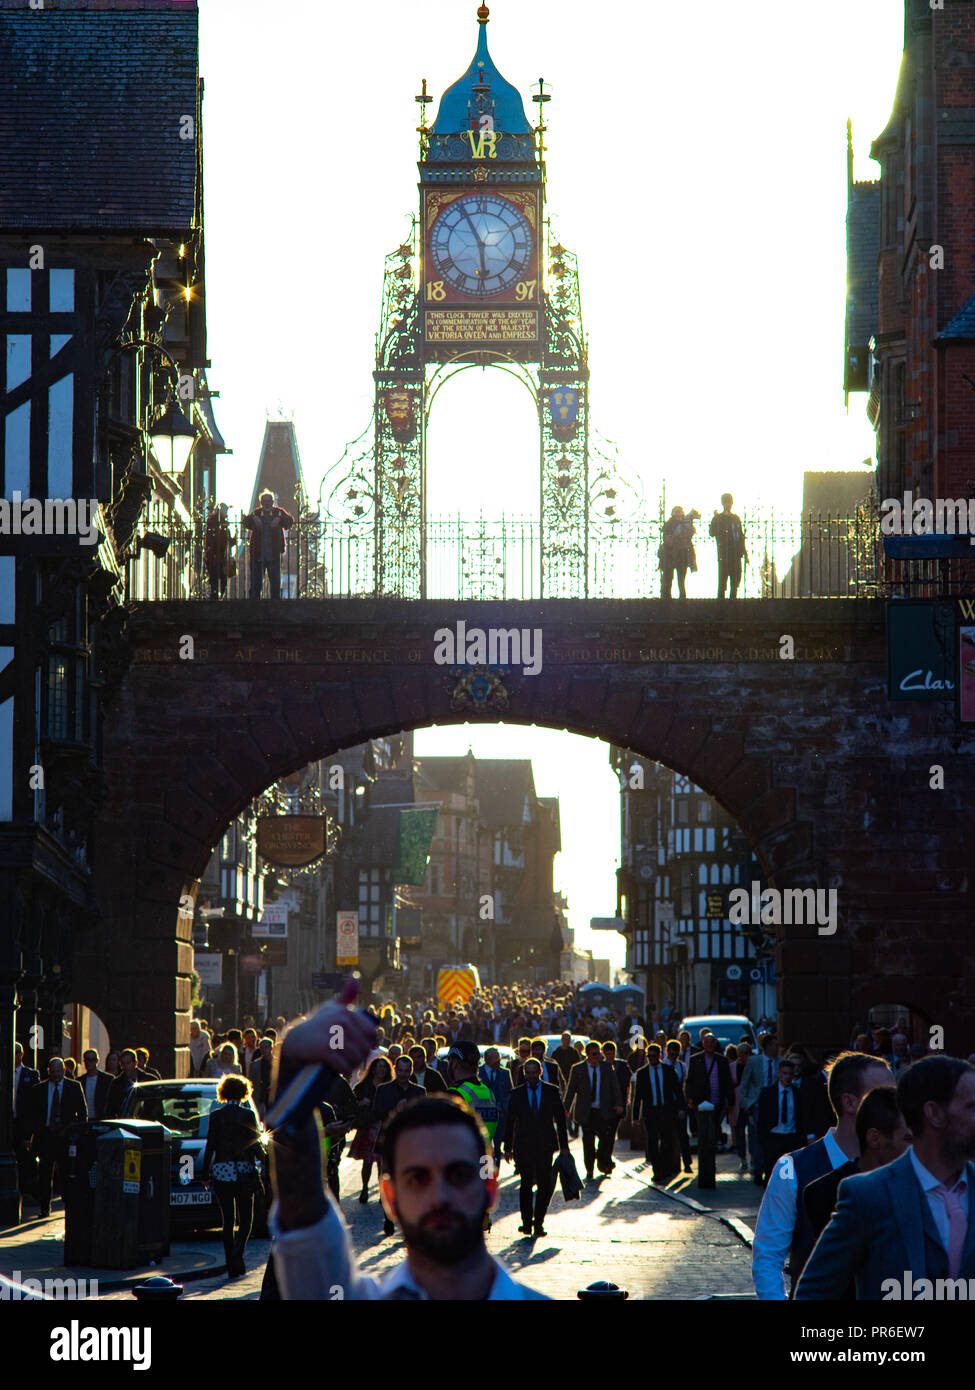 A busy Eastgate street in Chester on Race day. Image taken in September 2018. Stock Photo